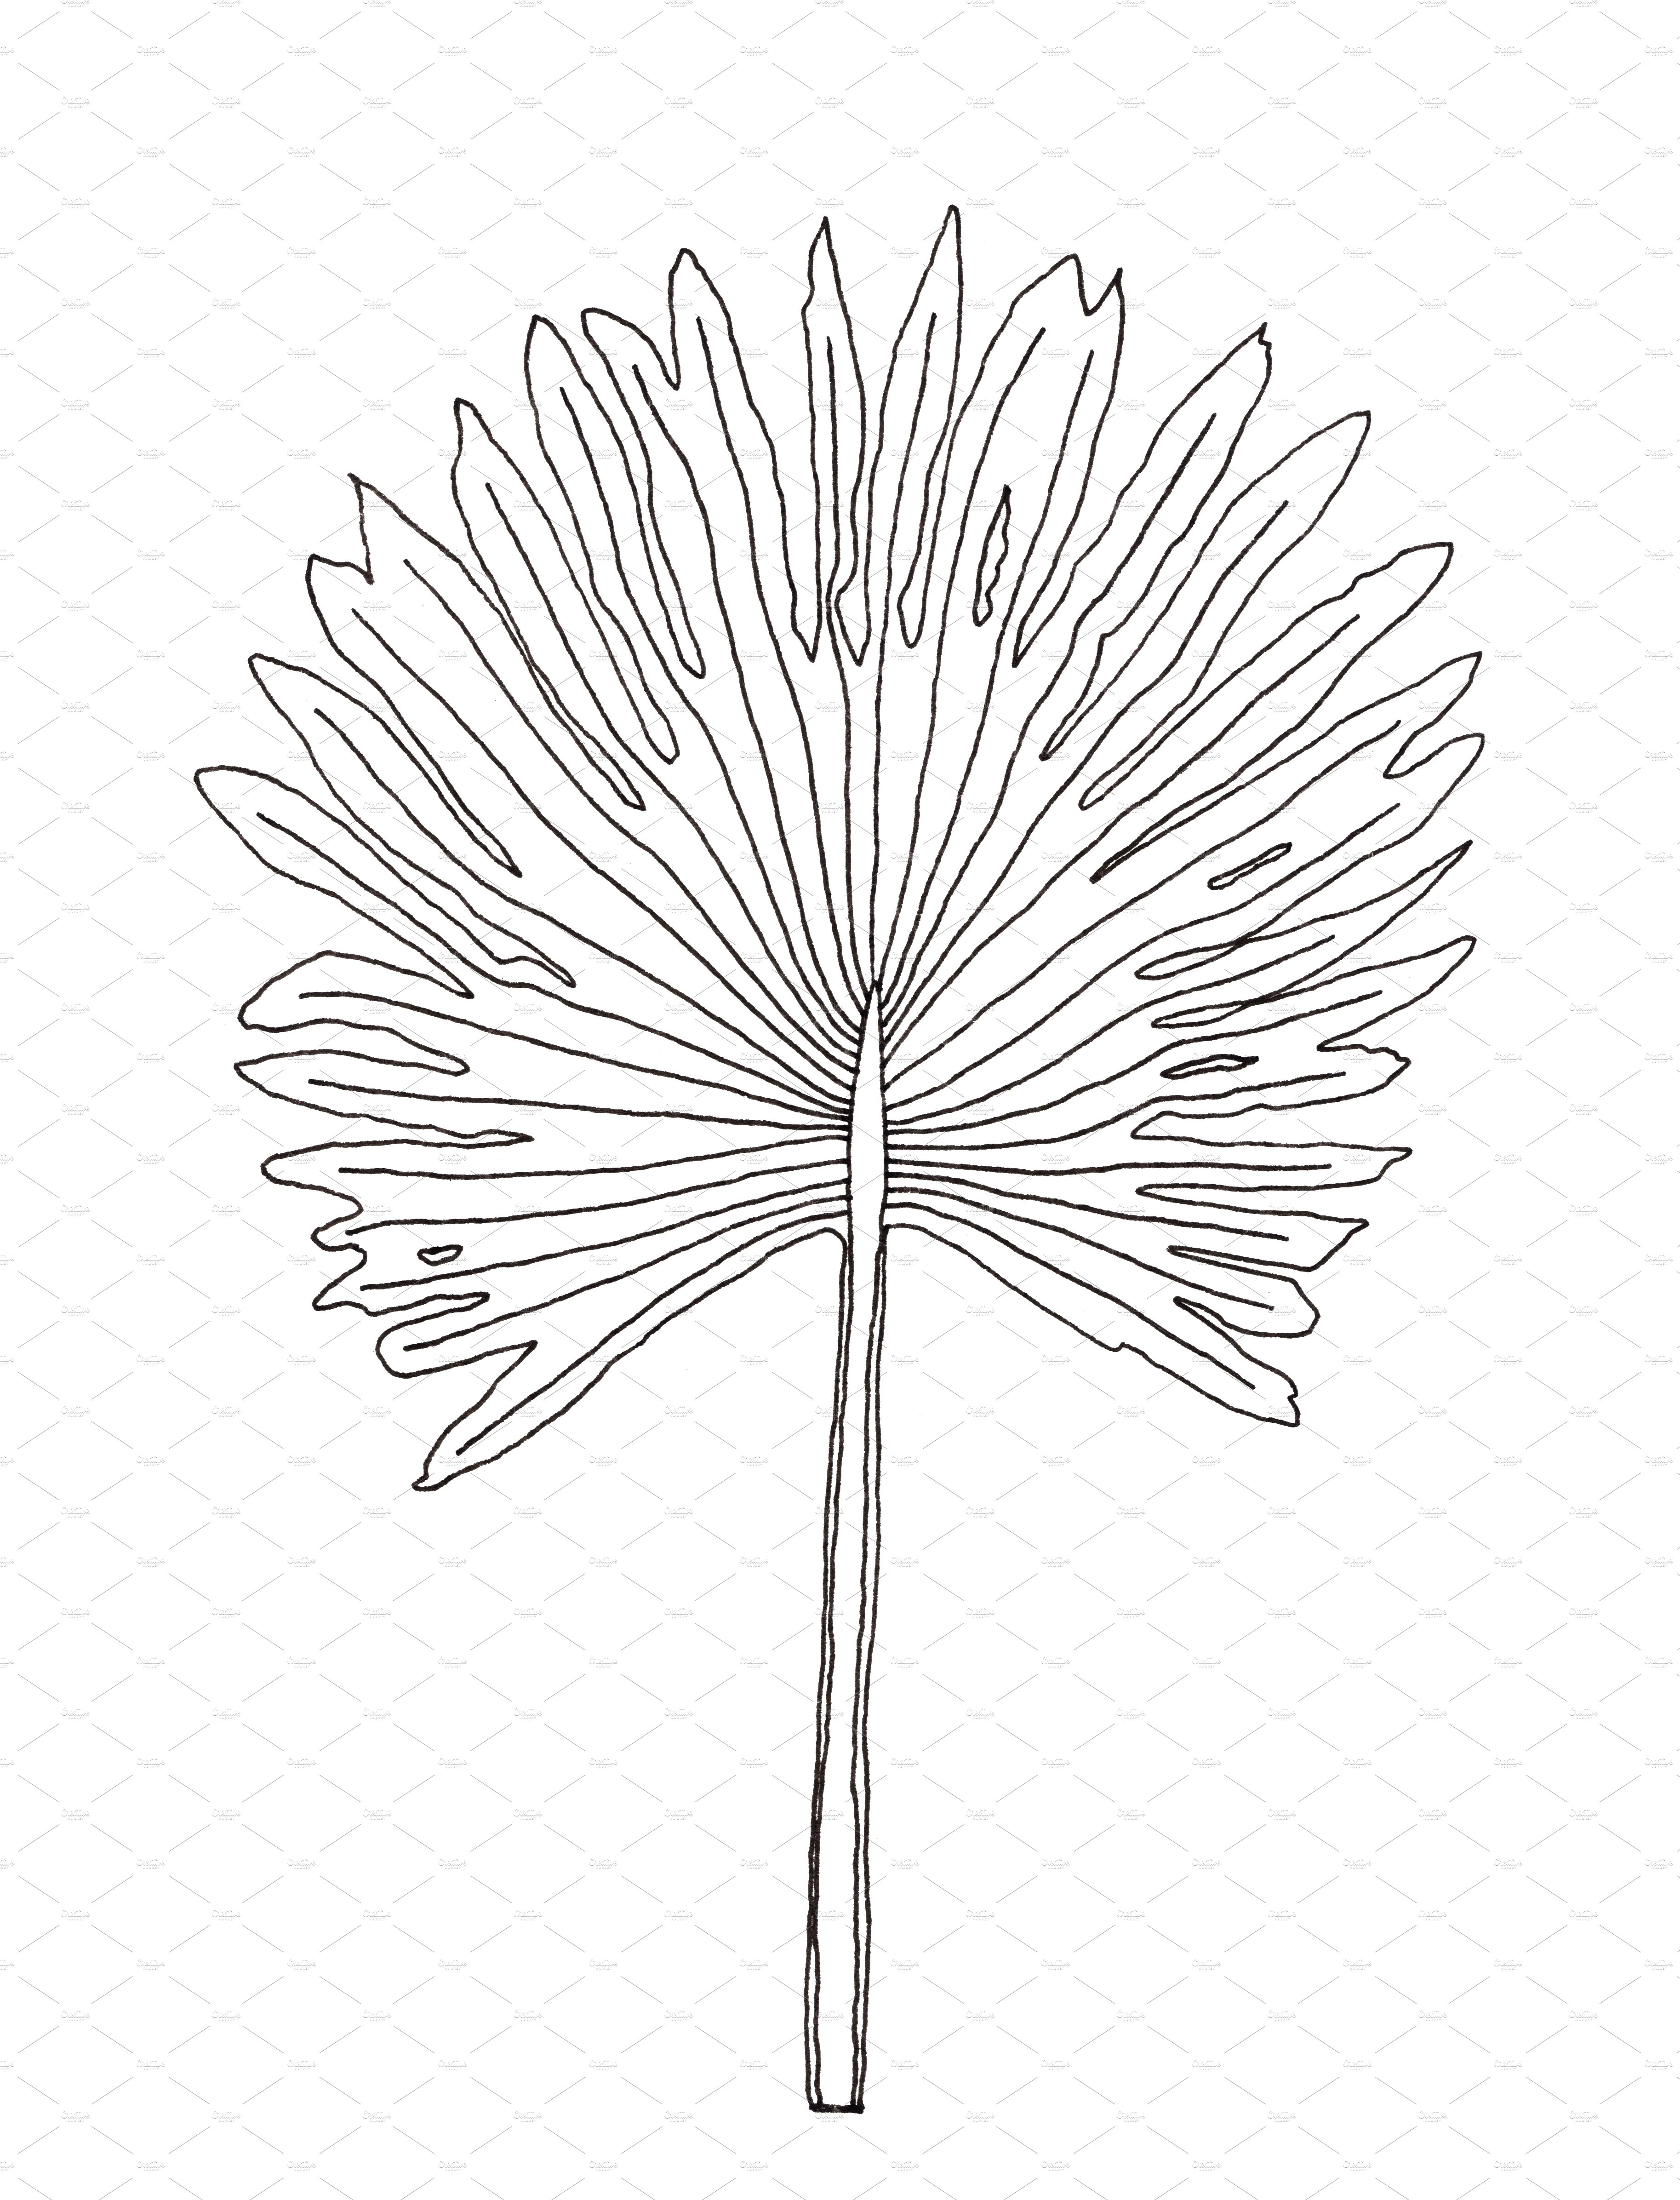 Black and white drawing of a large flower.